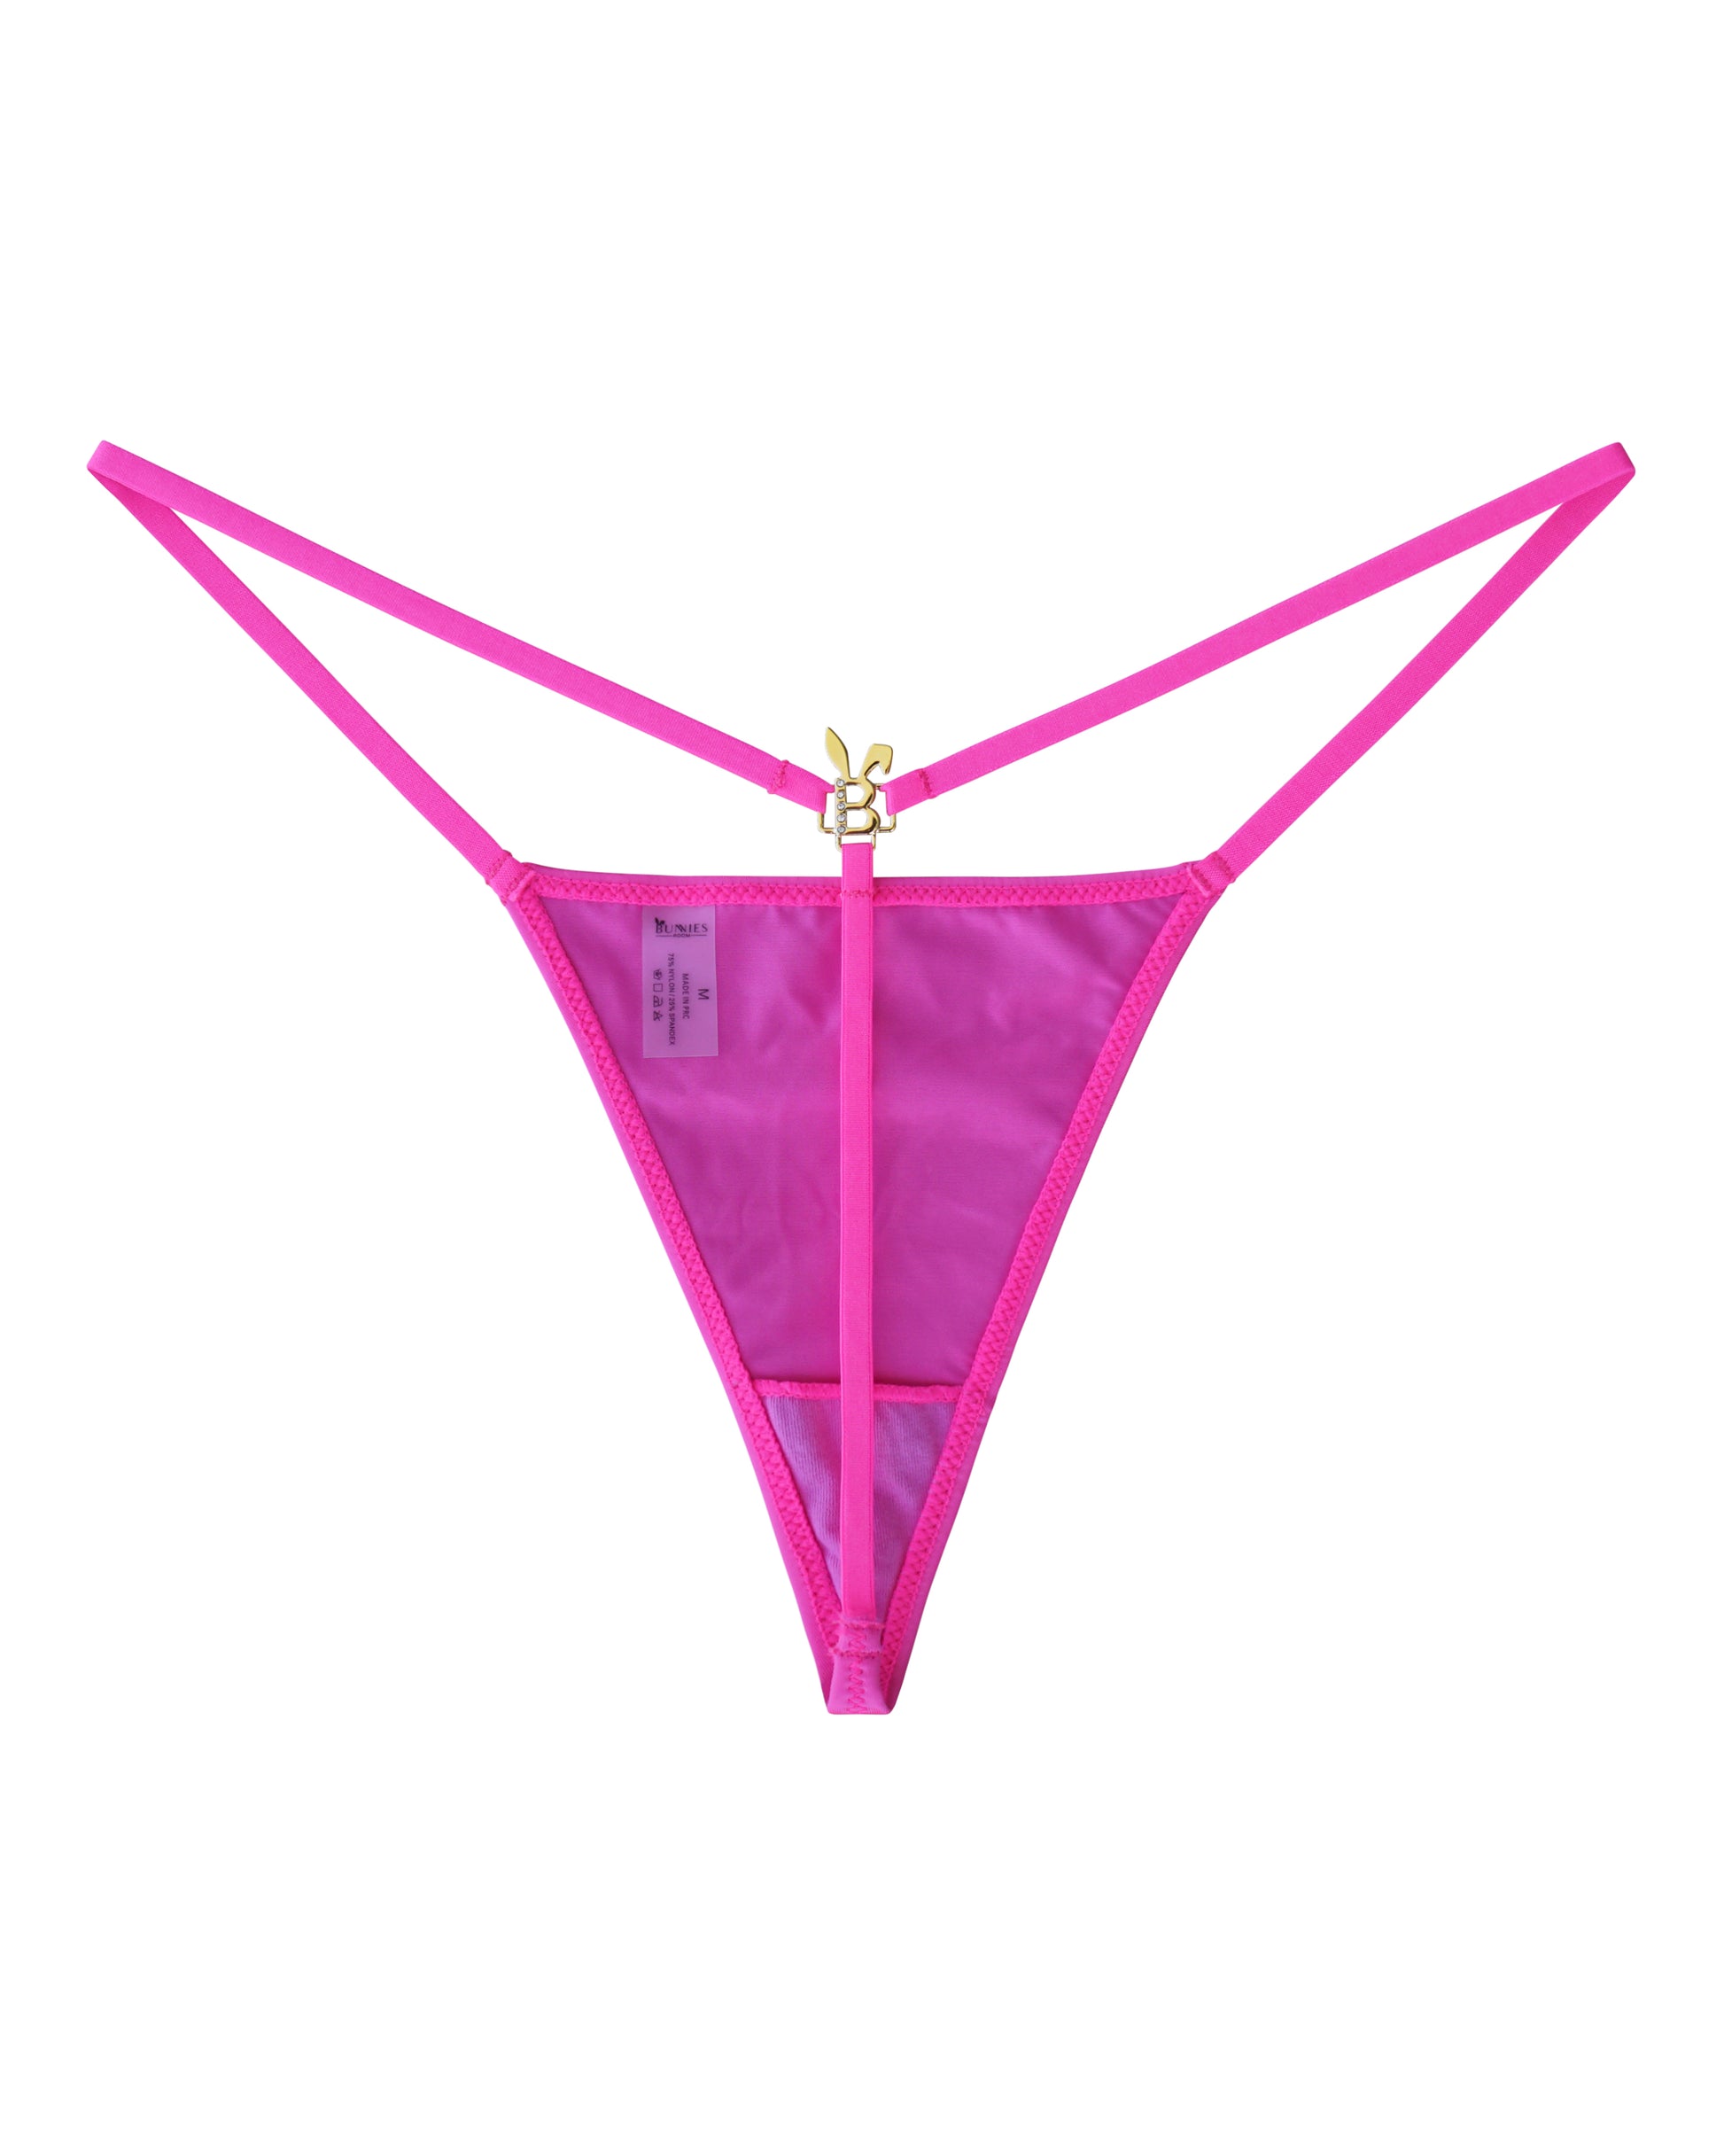 Bunnies' Room Bunny G-String Thong in Hot Pink L